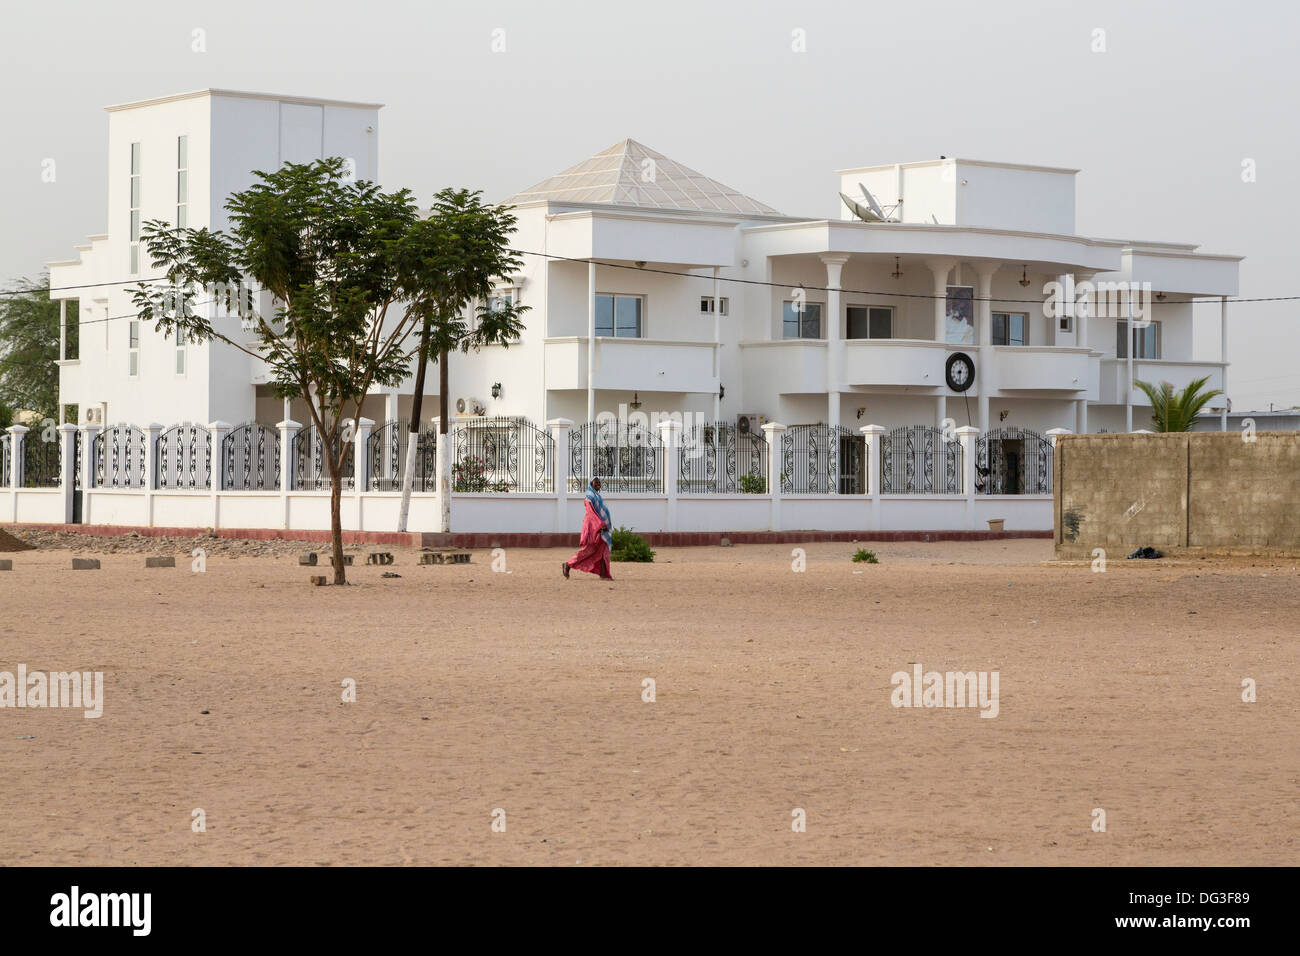 Senegal, Touba. Modern House with a Religious Leader's Picture above the Entrance. Stock Photo